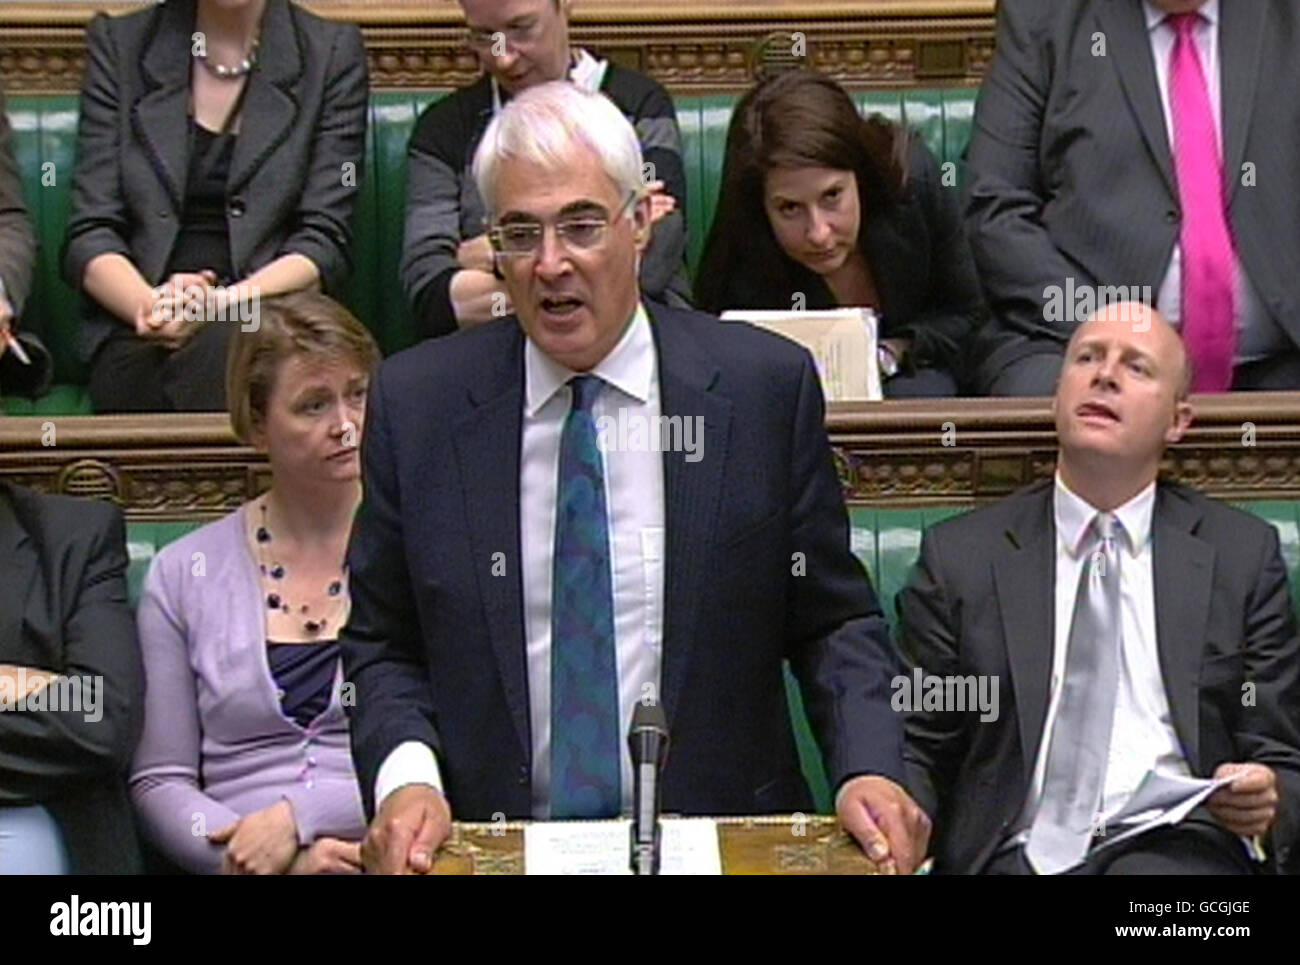 Shadow Chancellor Alistair Darling asks a question about the Government's spending cuts in the House of Commons, central London. Stock Photo